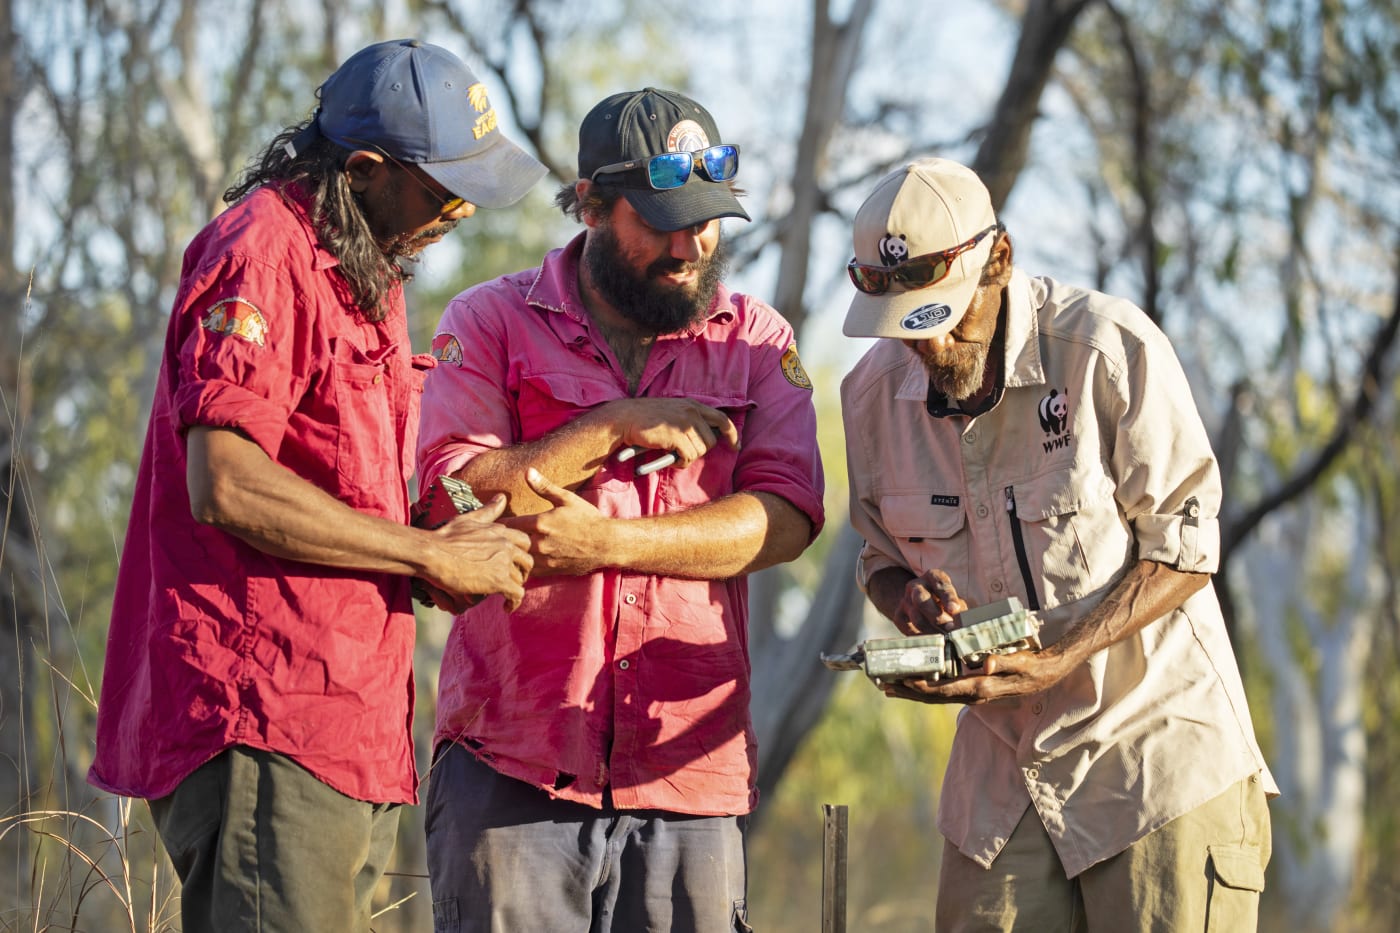 Nyaliga Rangers Thomas Birch (left) and Silas Purcell (middle) and WWF's Pius Gregory check a camera.